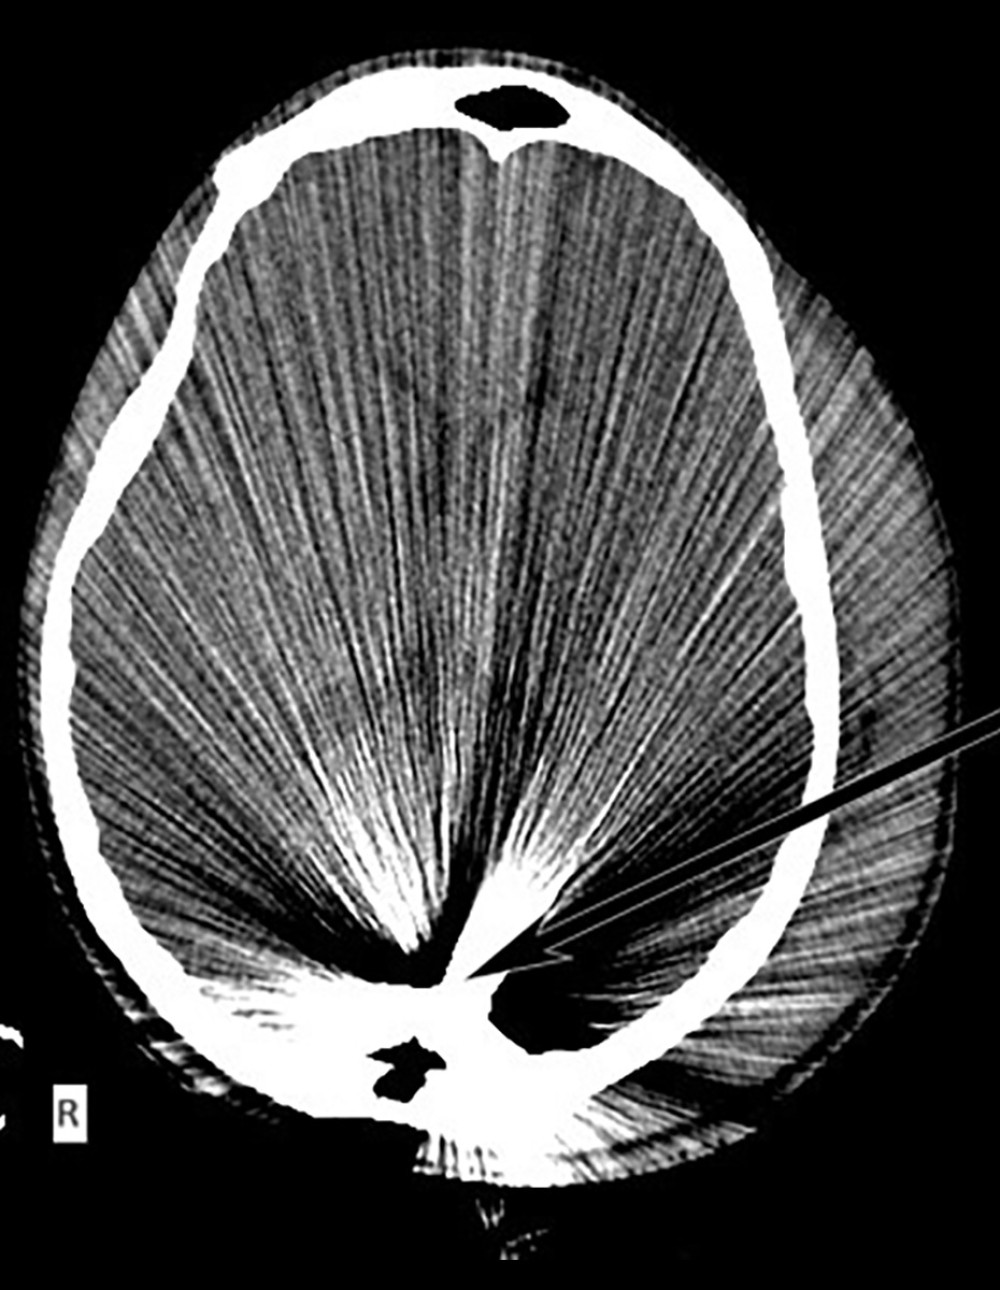 Acute-phase axial computed tomography scan. The arrow points to the central mass of the bullet in the occipital lobe, with no exit found.